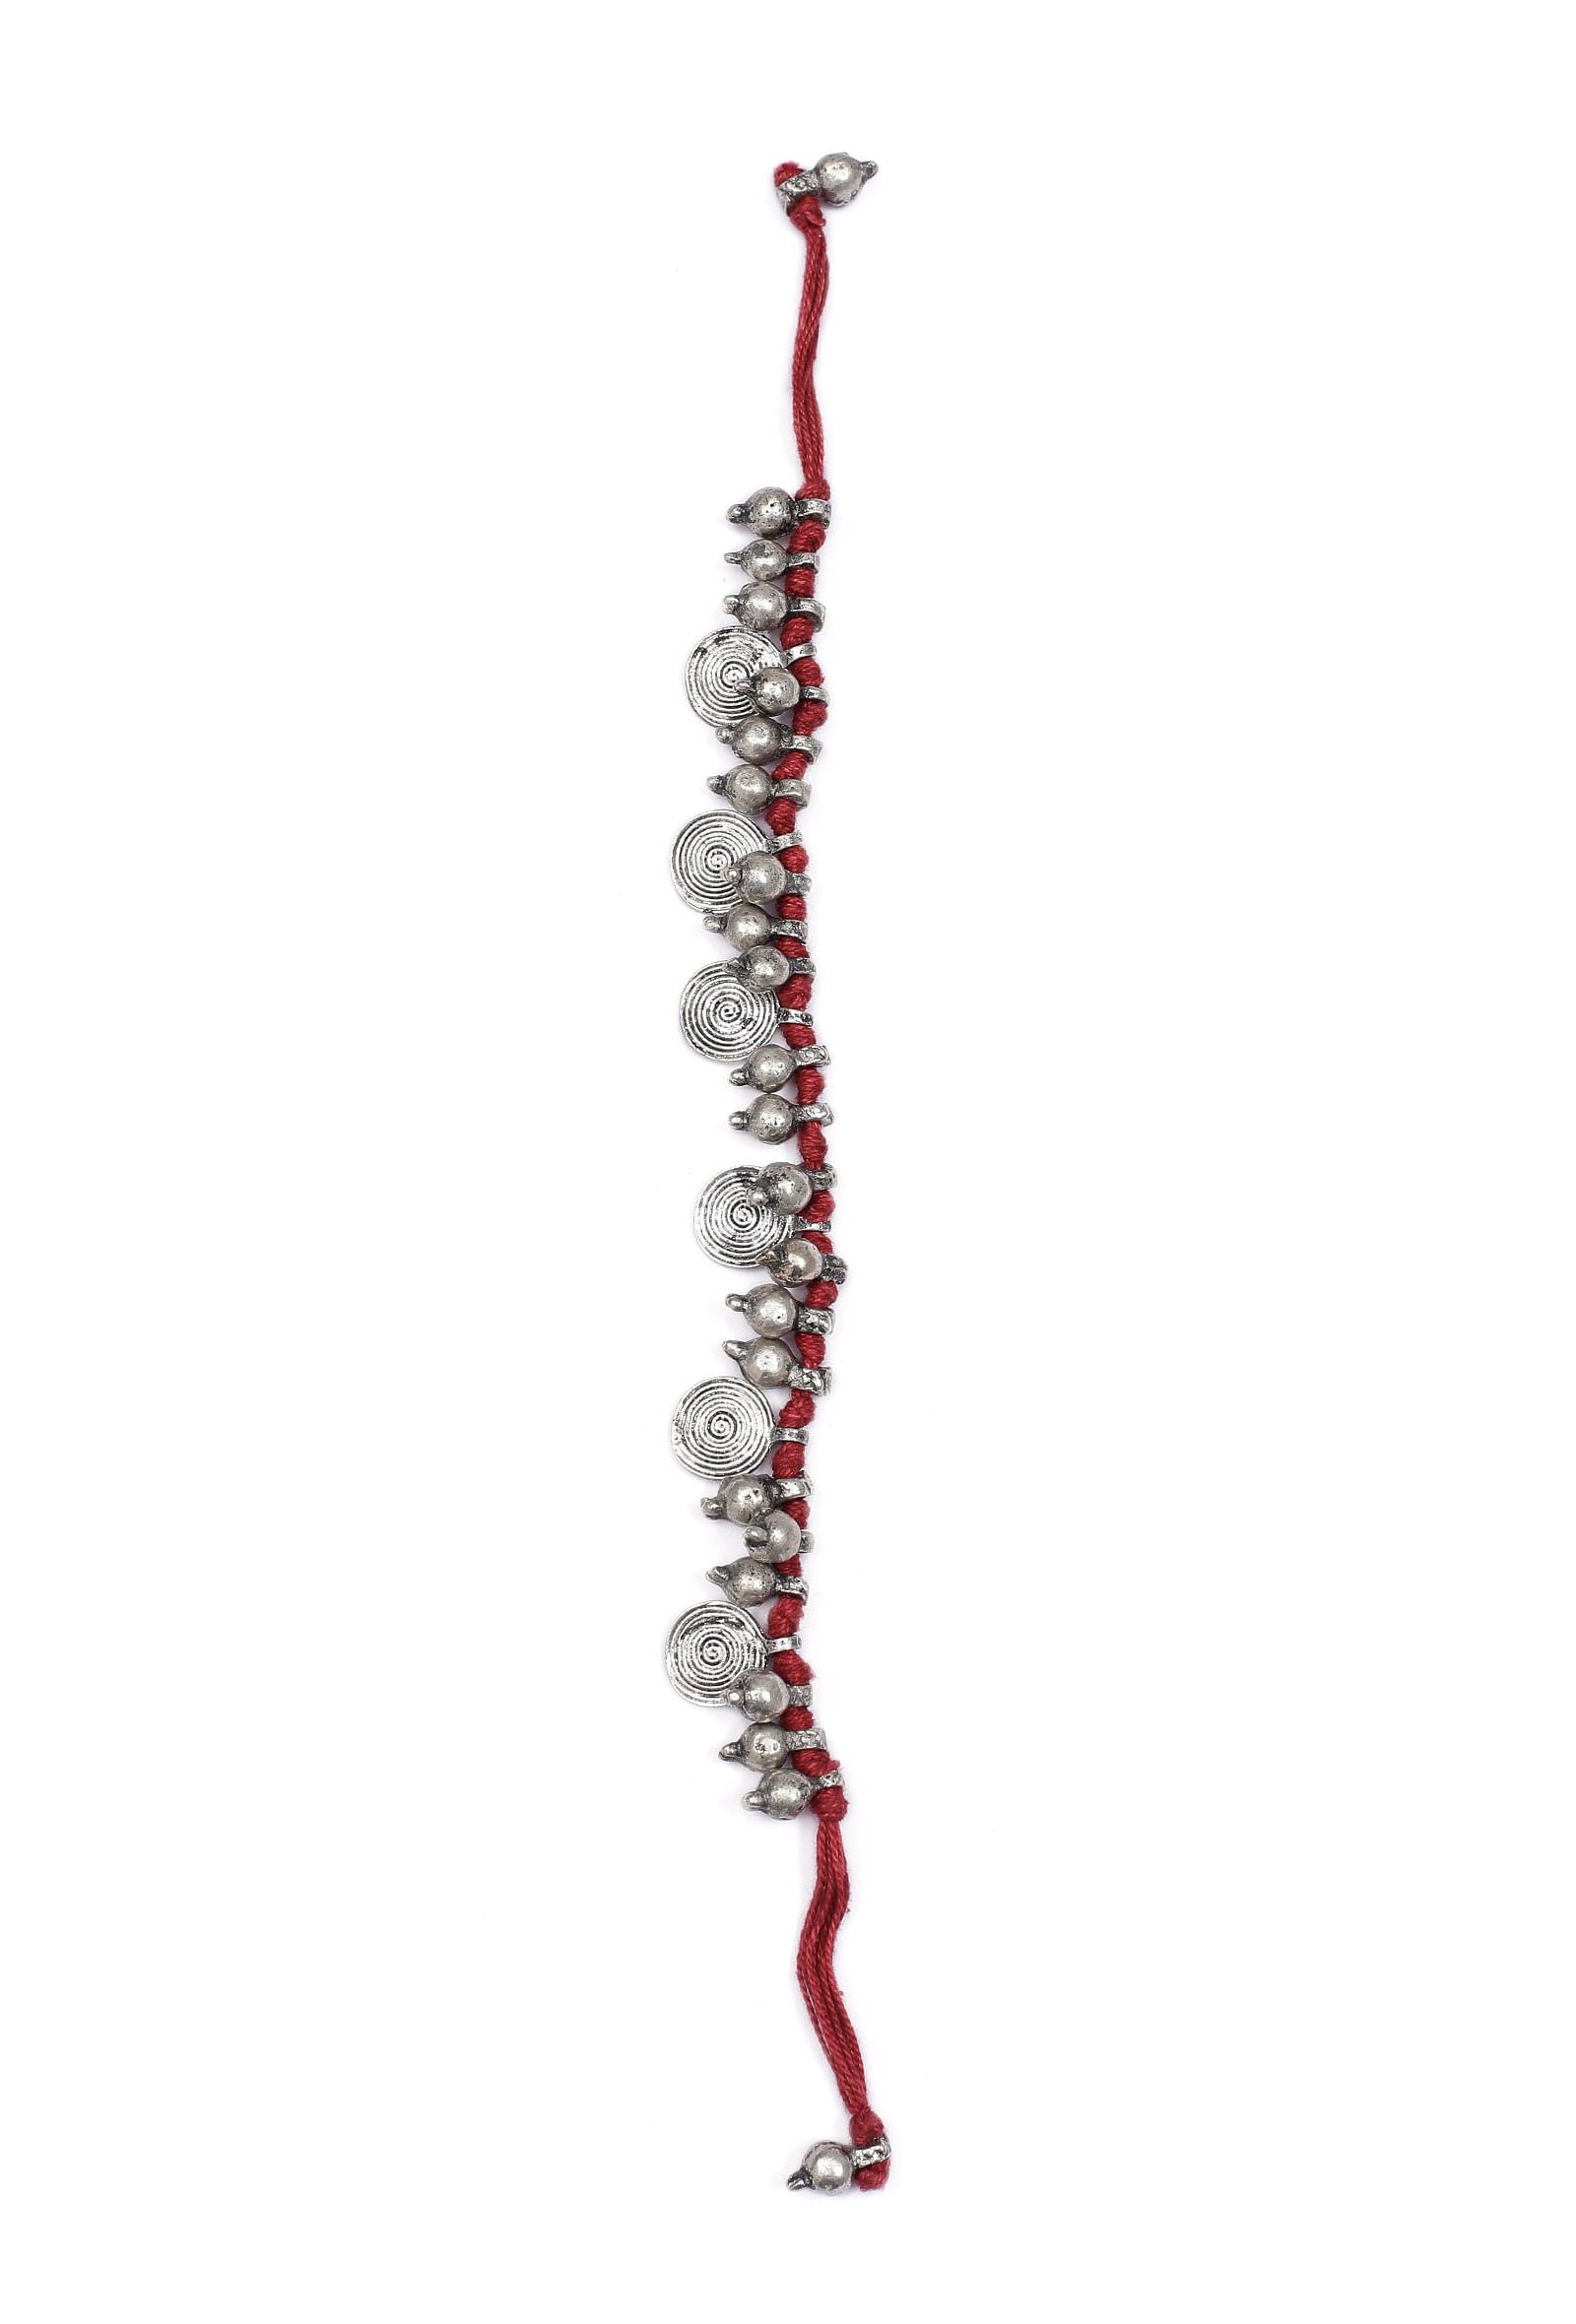 Scarlet Maroon with Silver Beads Necklace